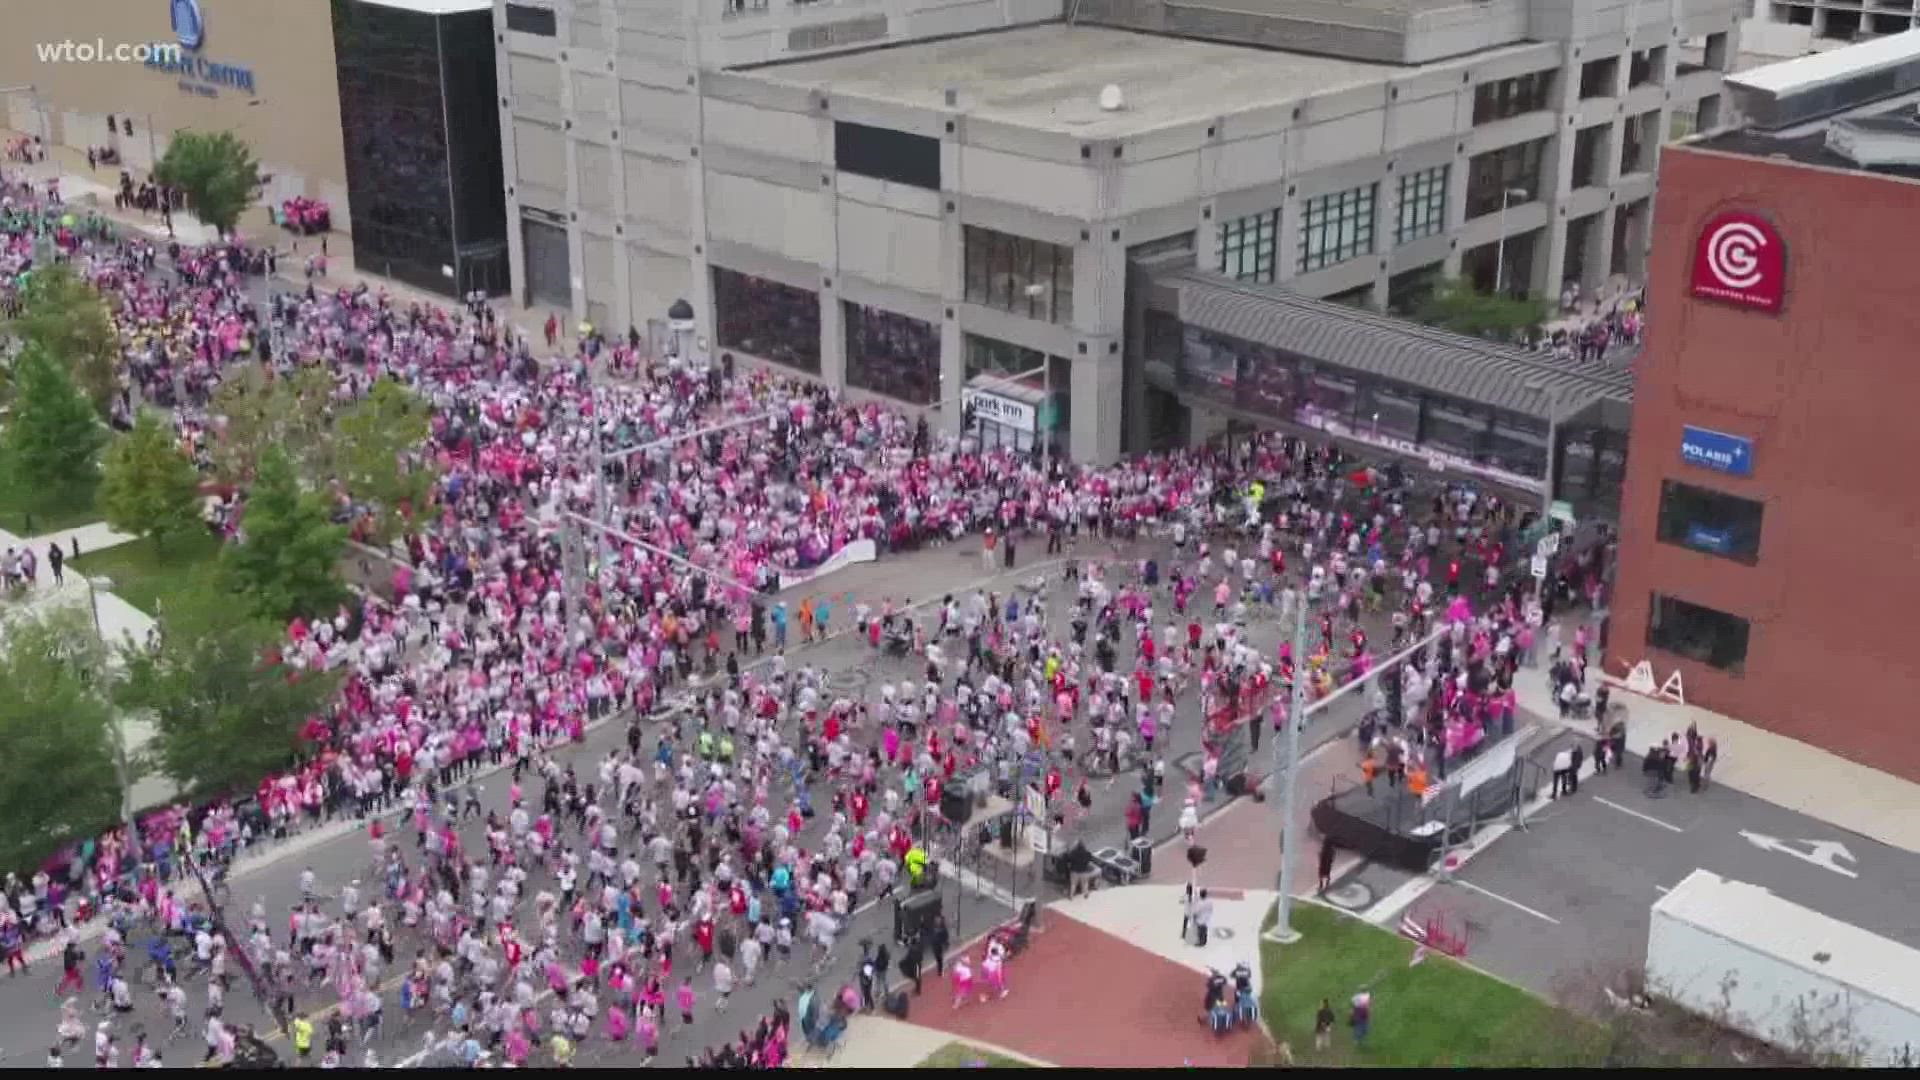 The Susan G. Komen Races for the Cure are this weekend! Here's all the last-minute information you need to know!